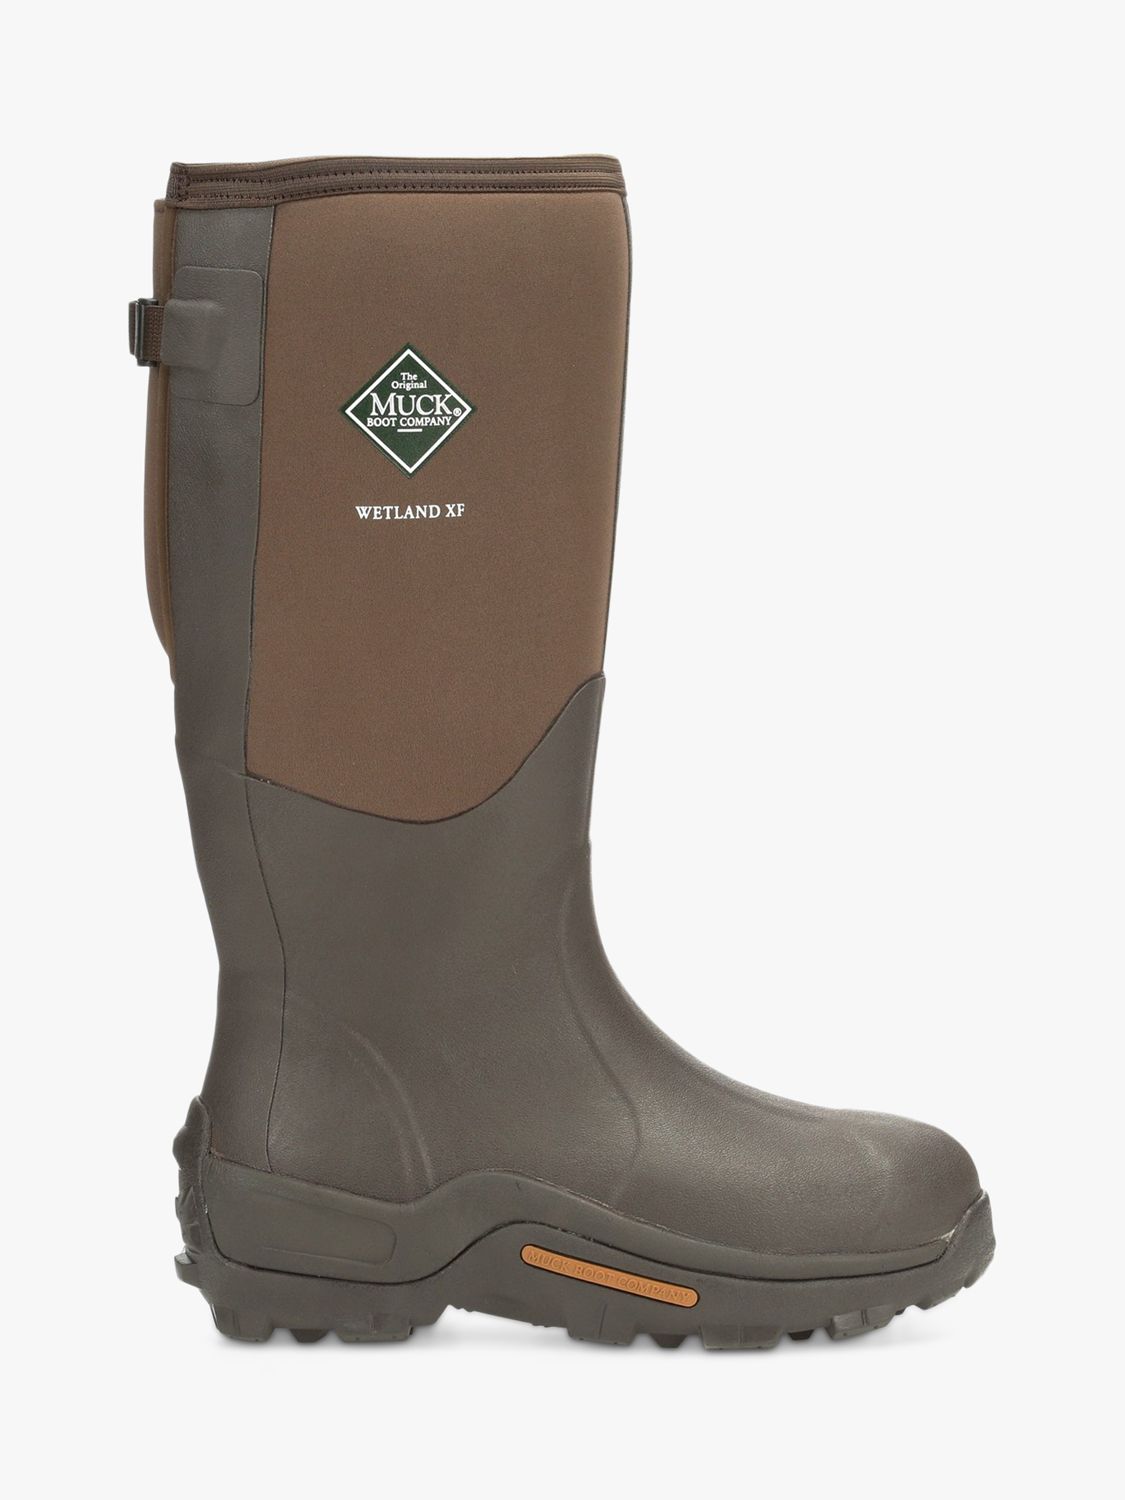 Muck Wetland XF Tall Wellington Boots, Brown at John Lewis & Partners